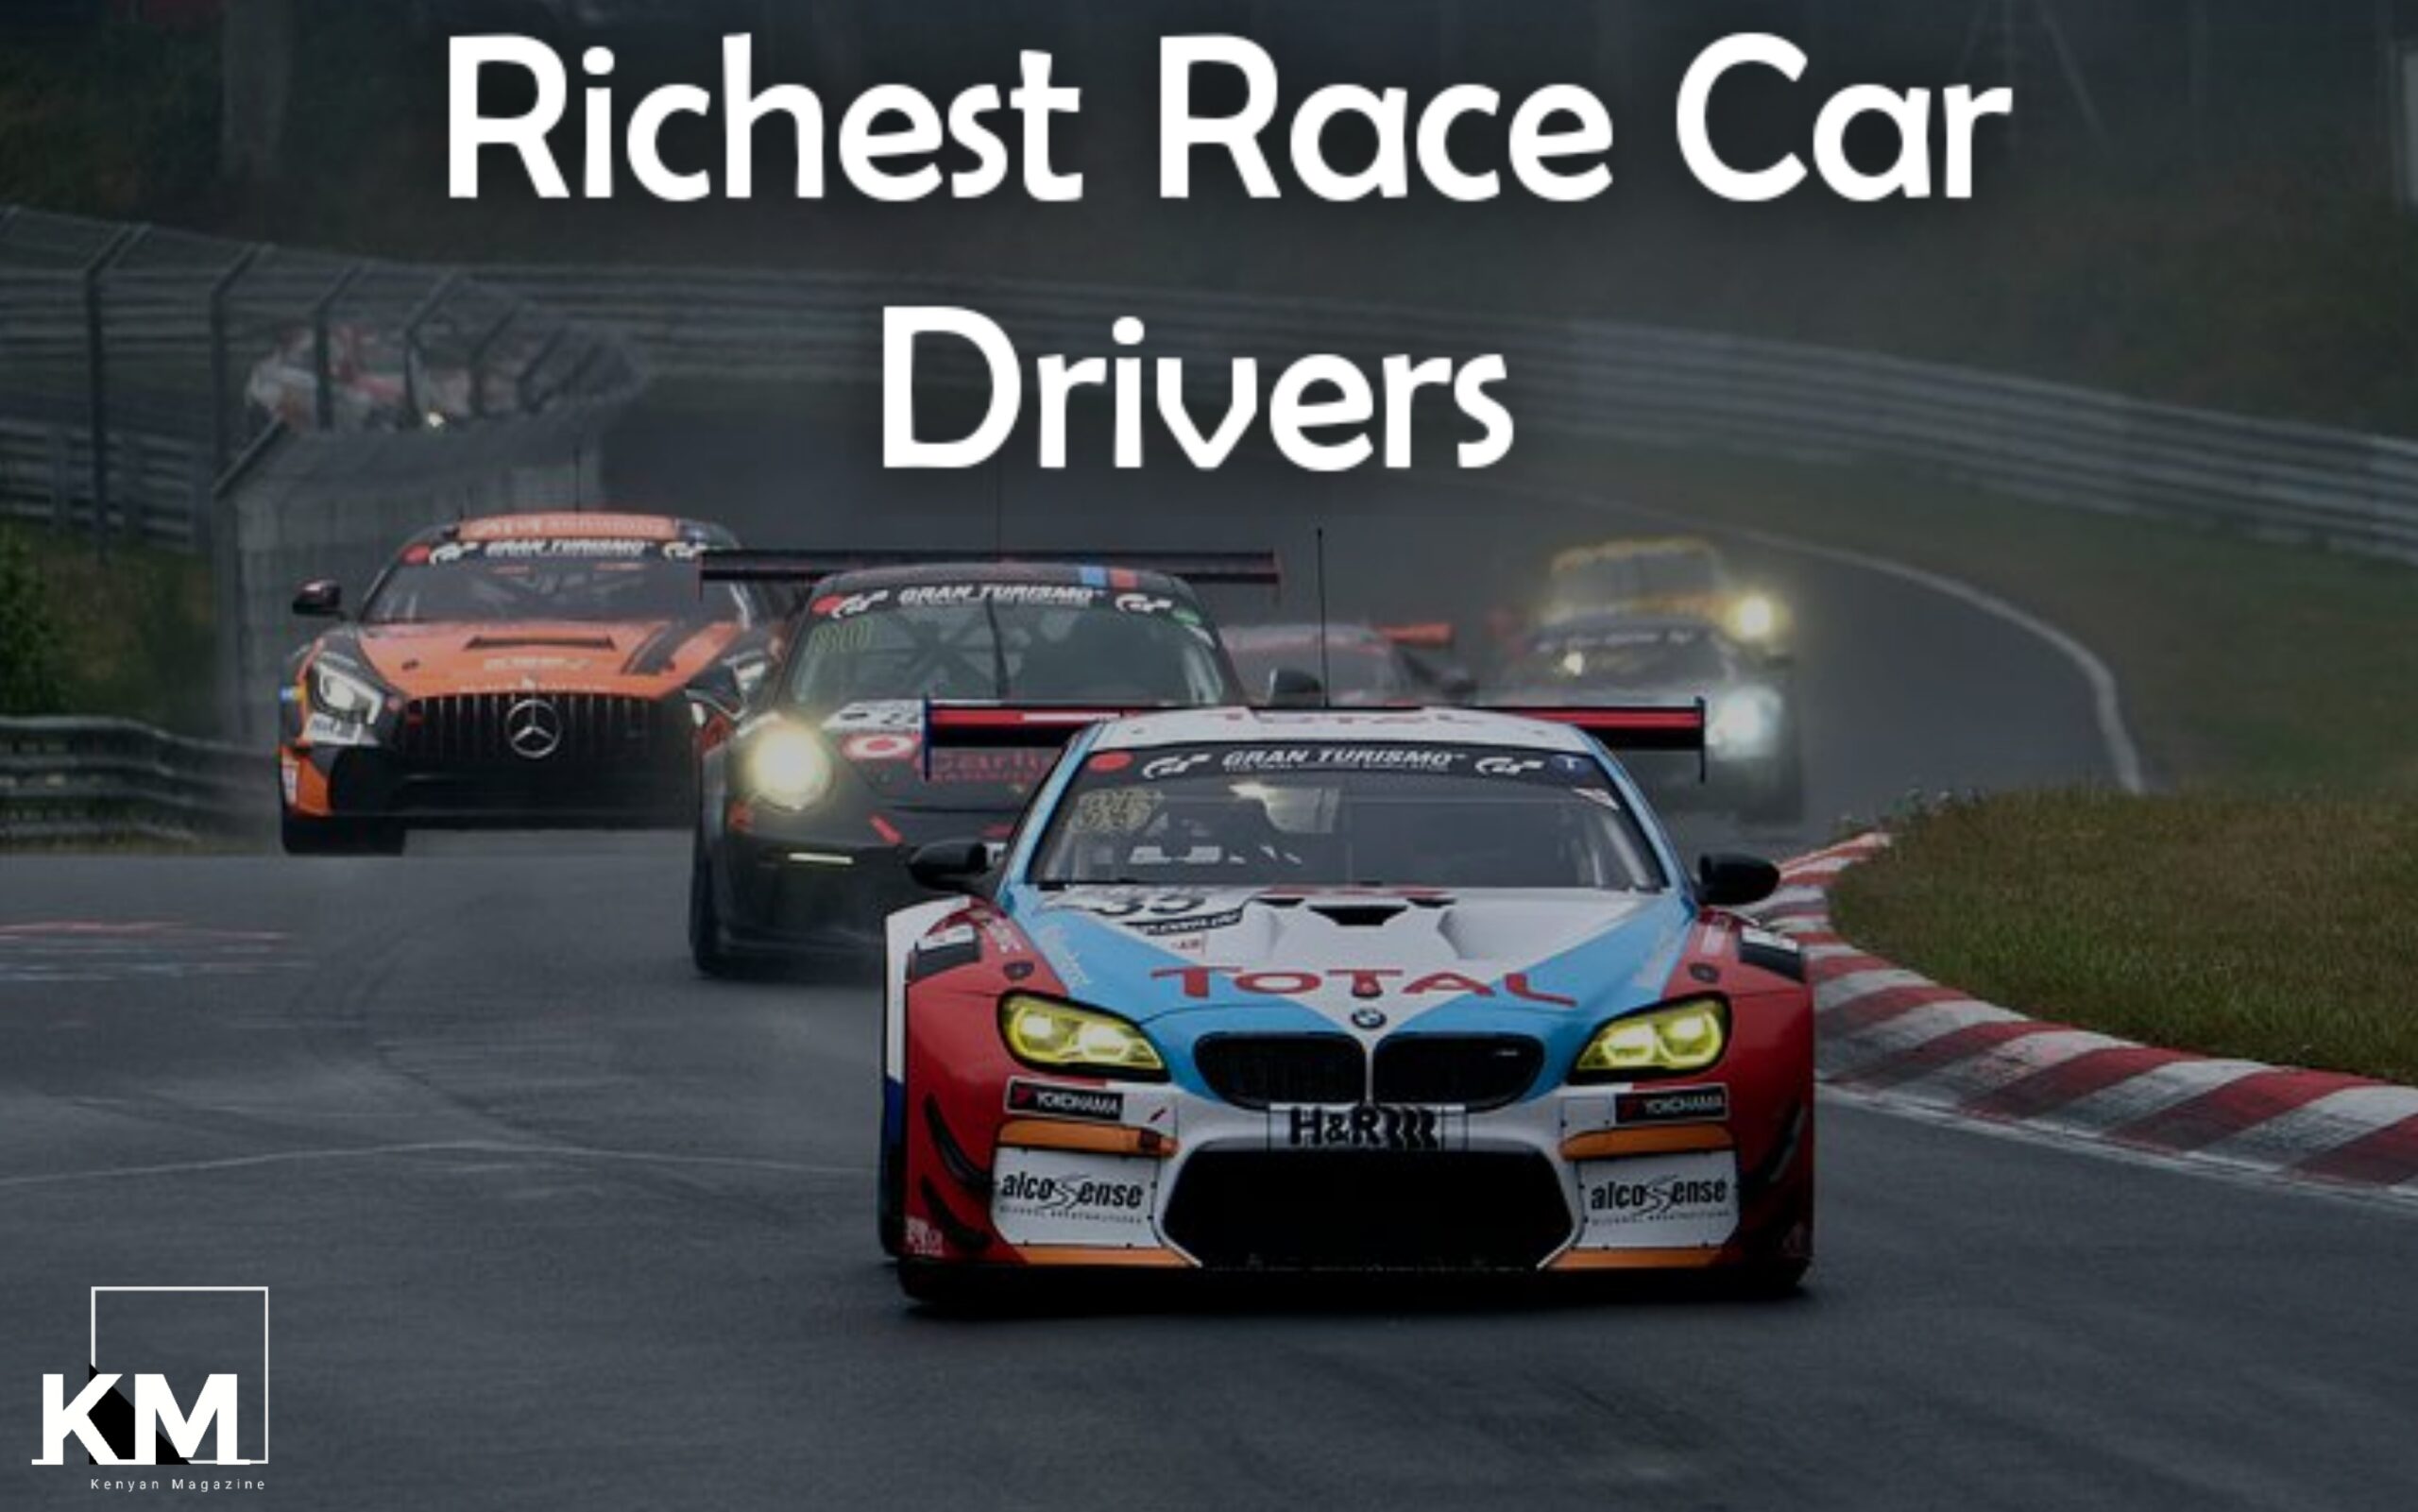 Richest racing drivers